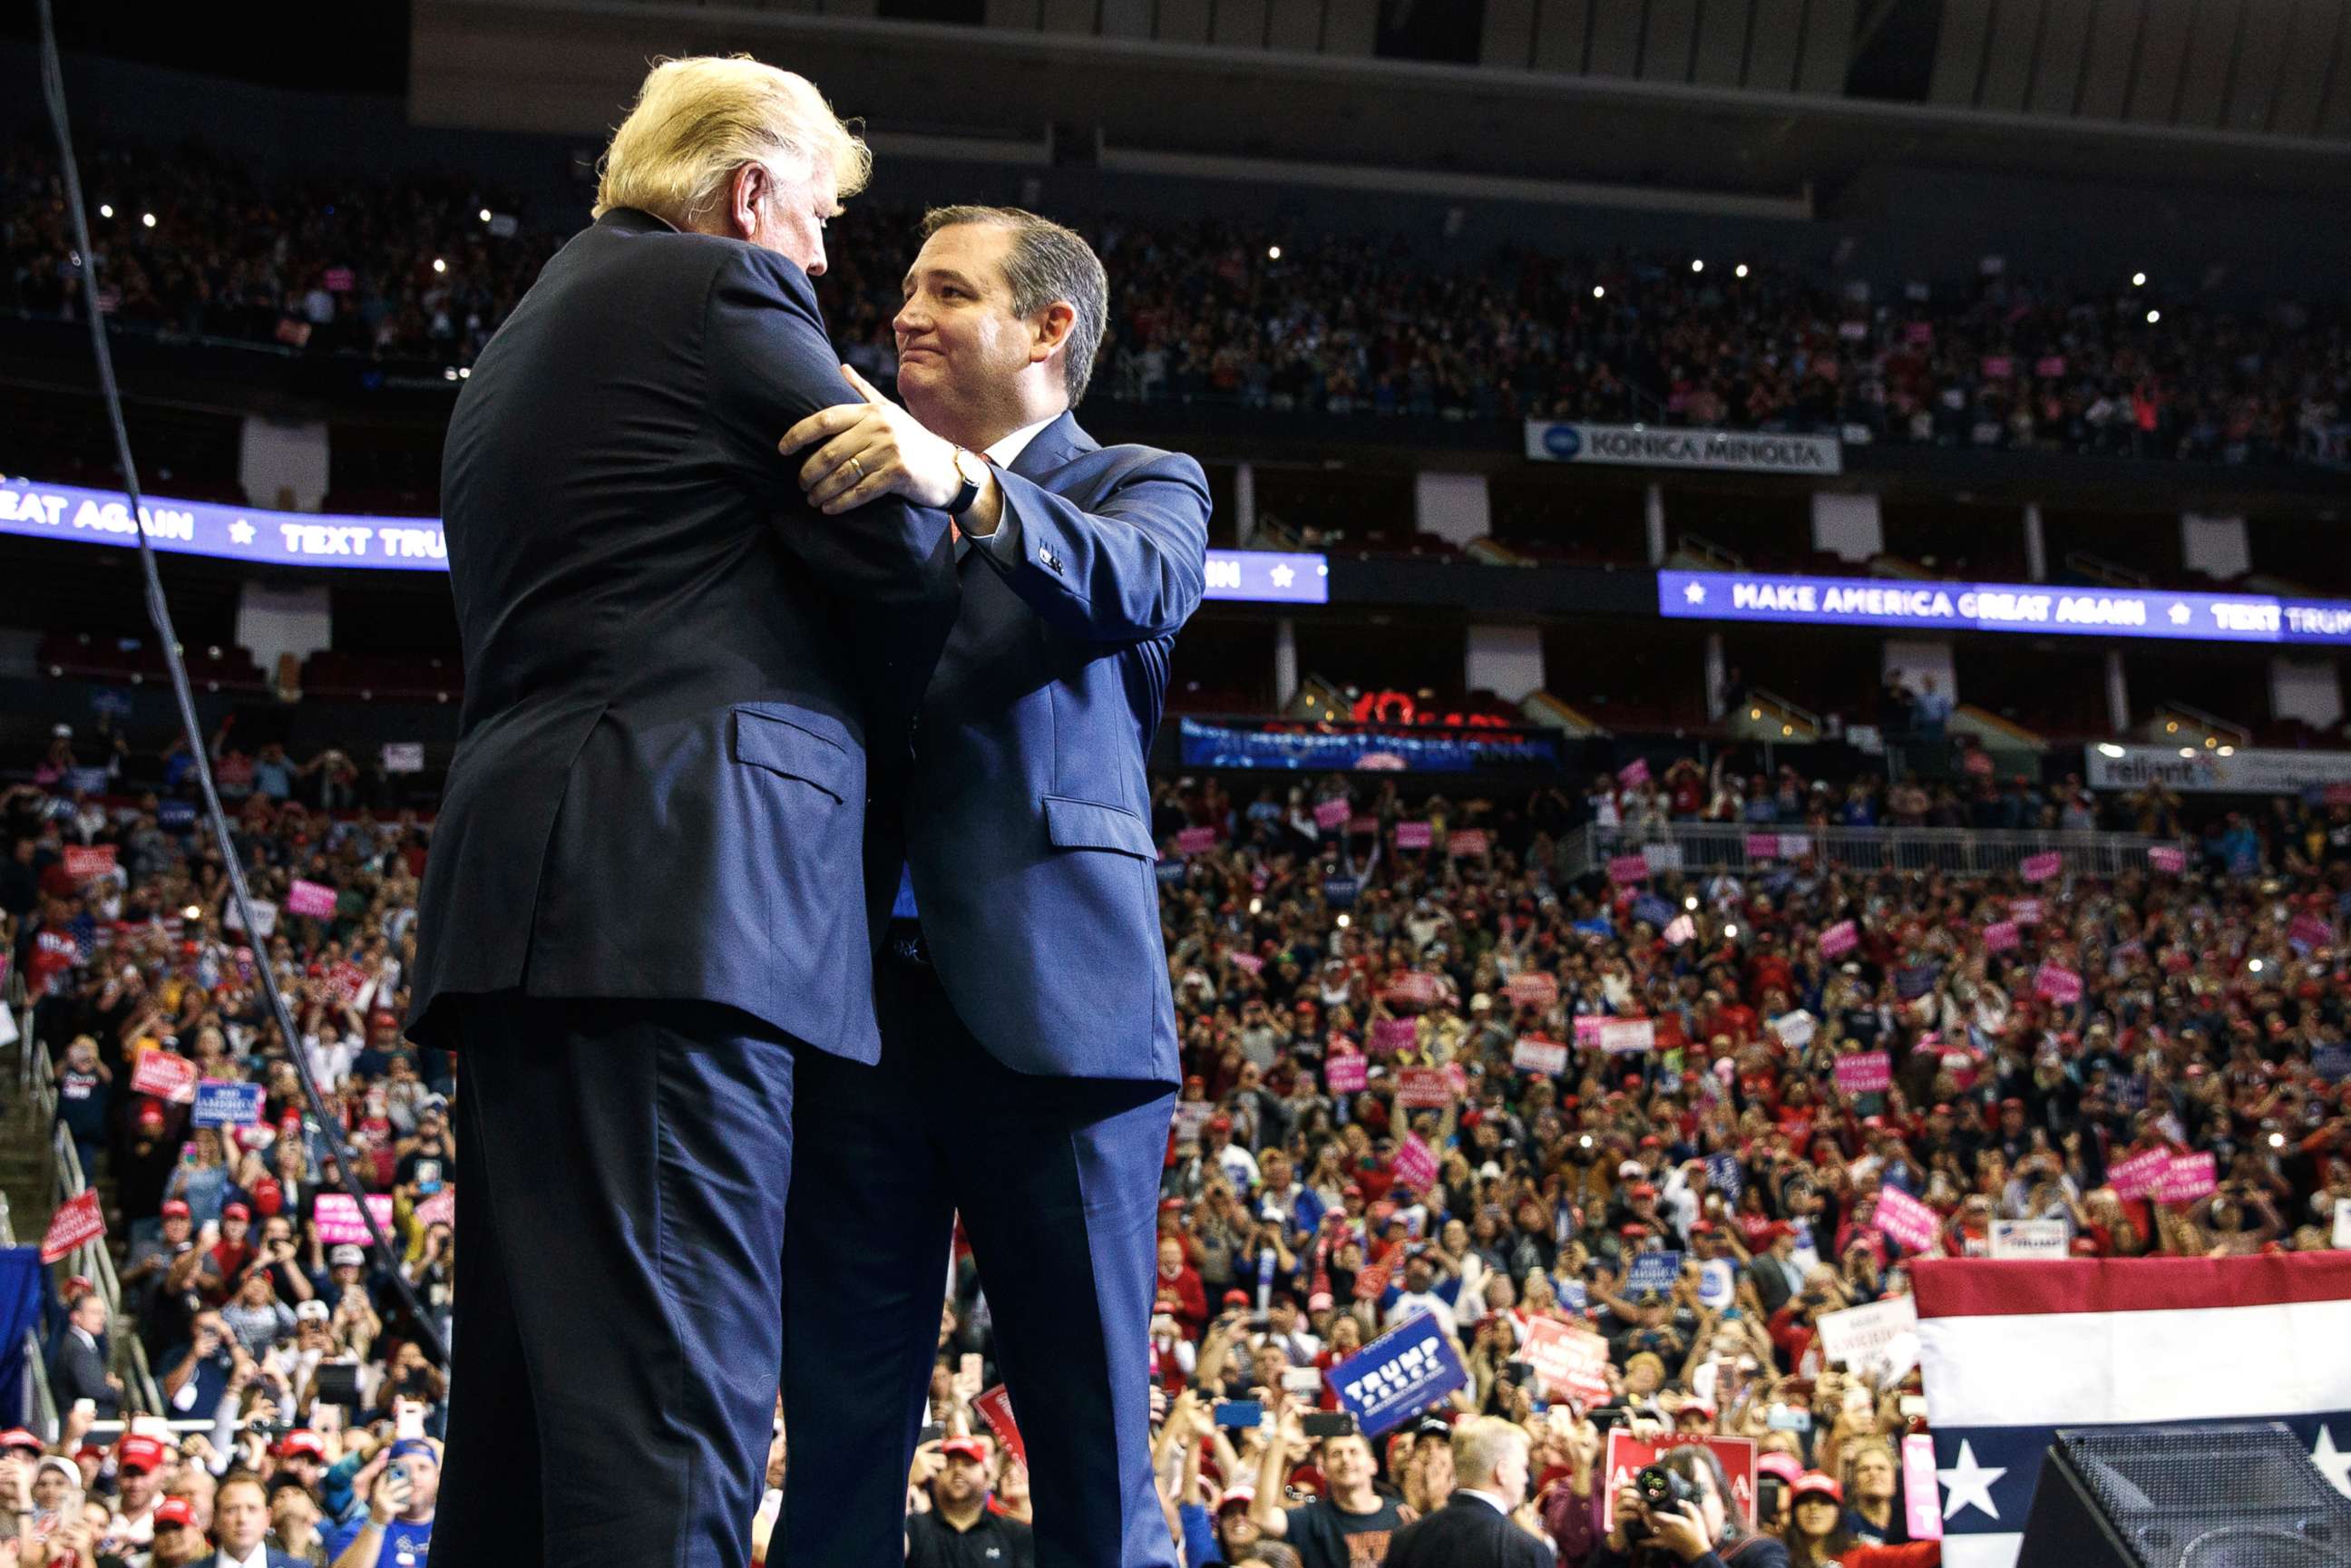 PHOTO: President Donald Trump is greeted by Sen. Ted Cruz as he arrives for a campaign rally on Oct. 22, 2018, in Houston.